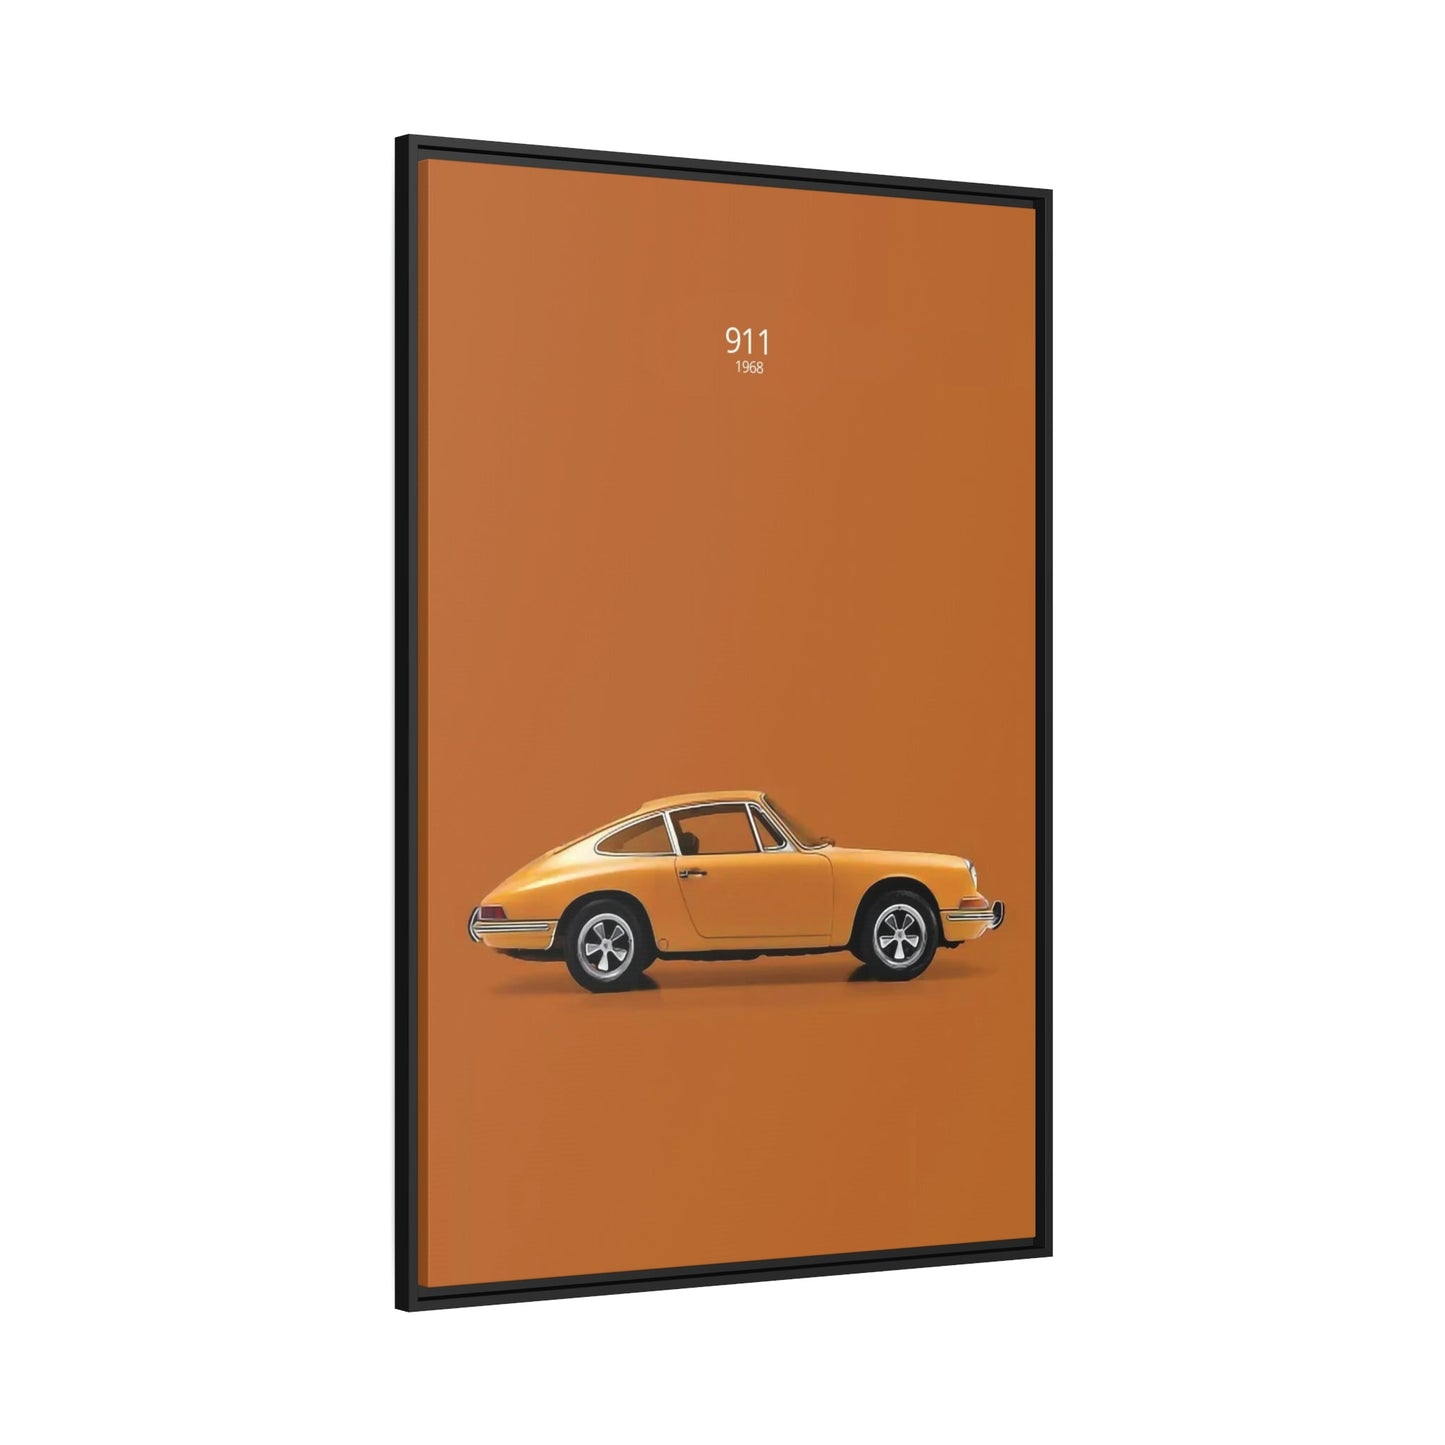 Porsche Passion: A Canvas & Poster Print of the Iconic Sports Car